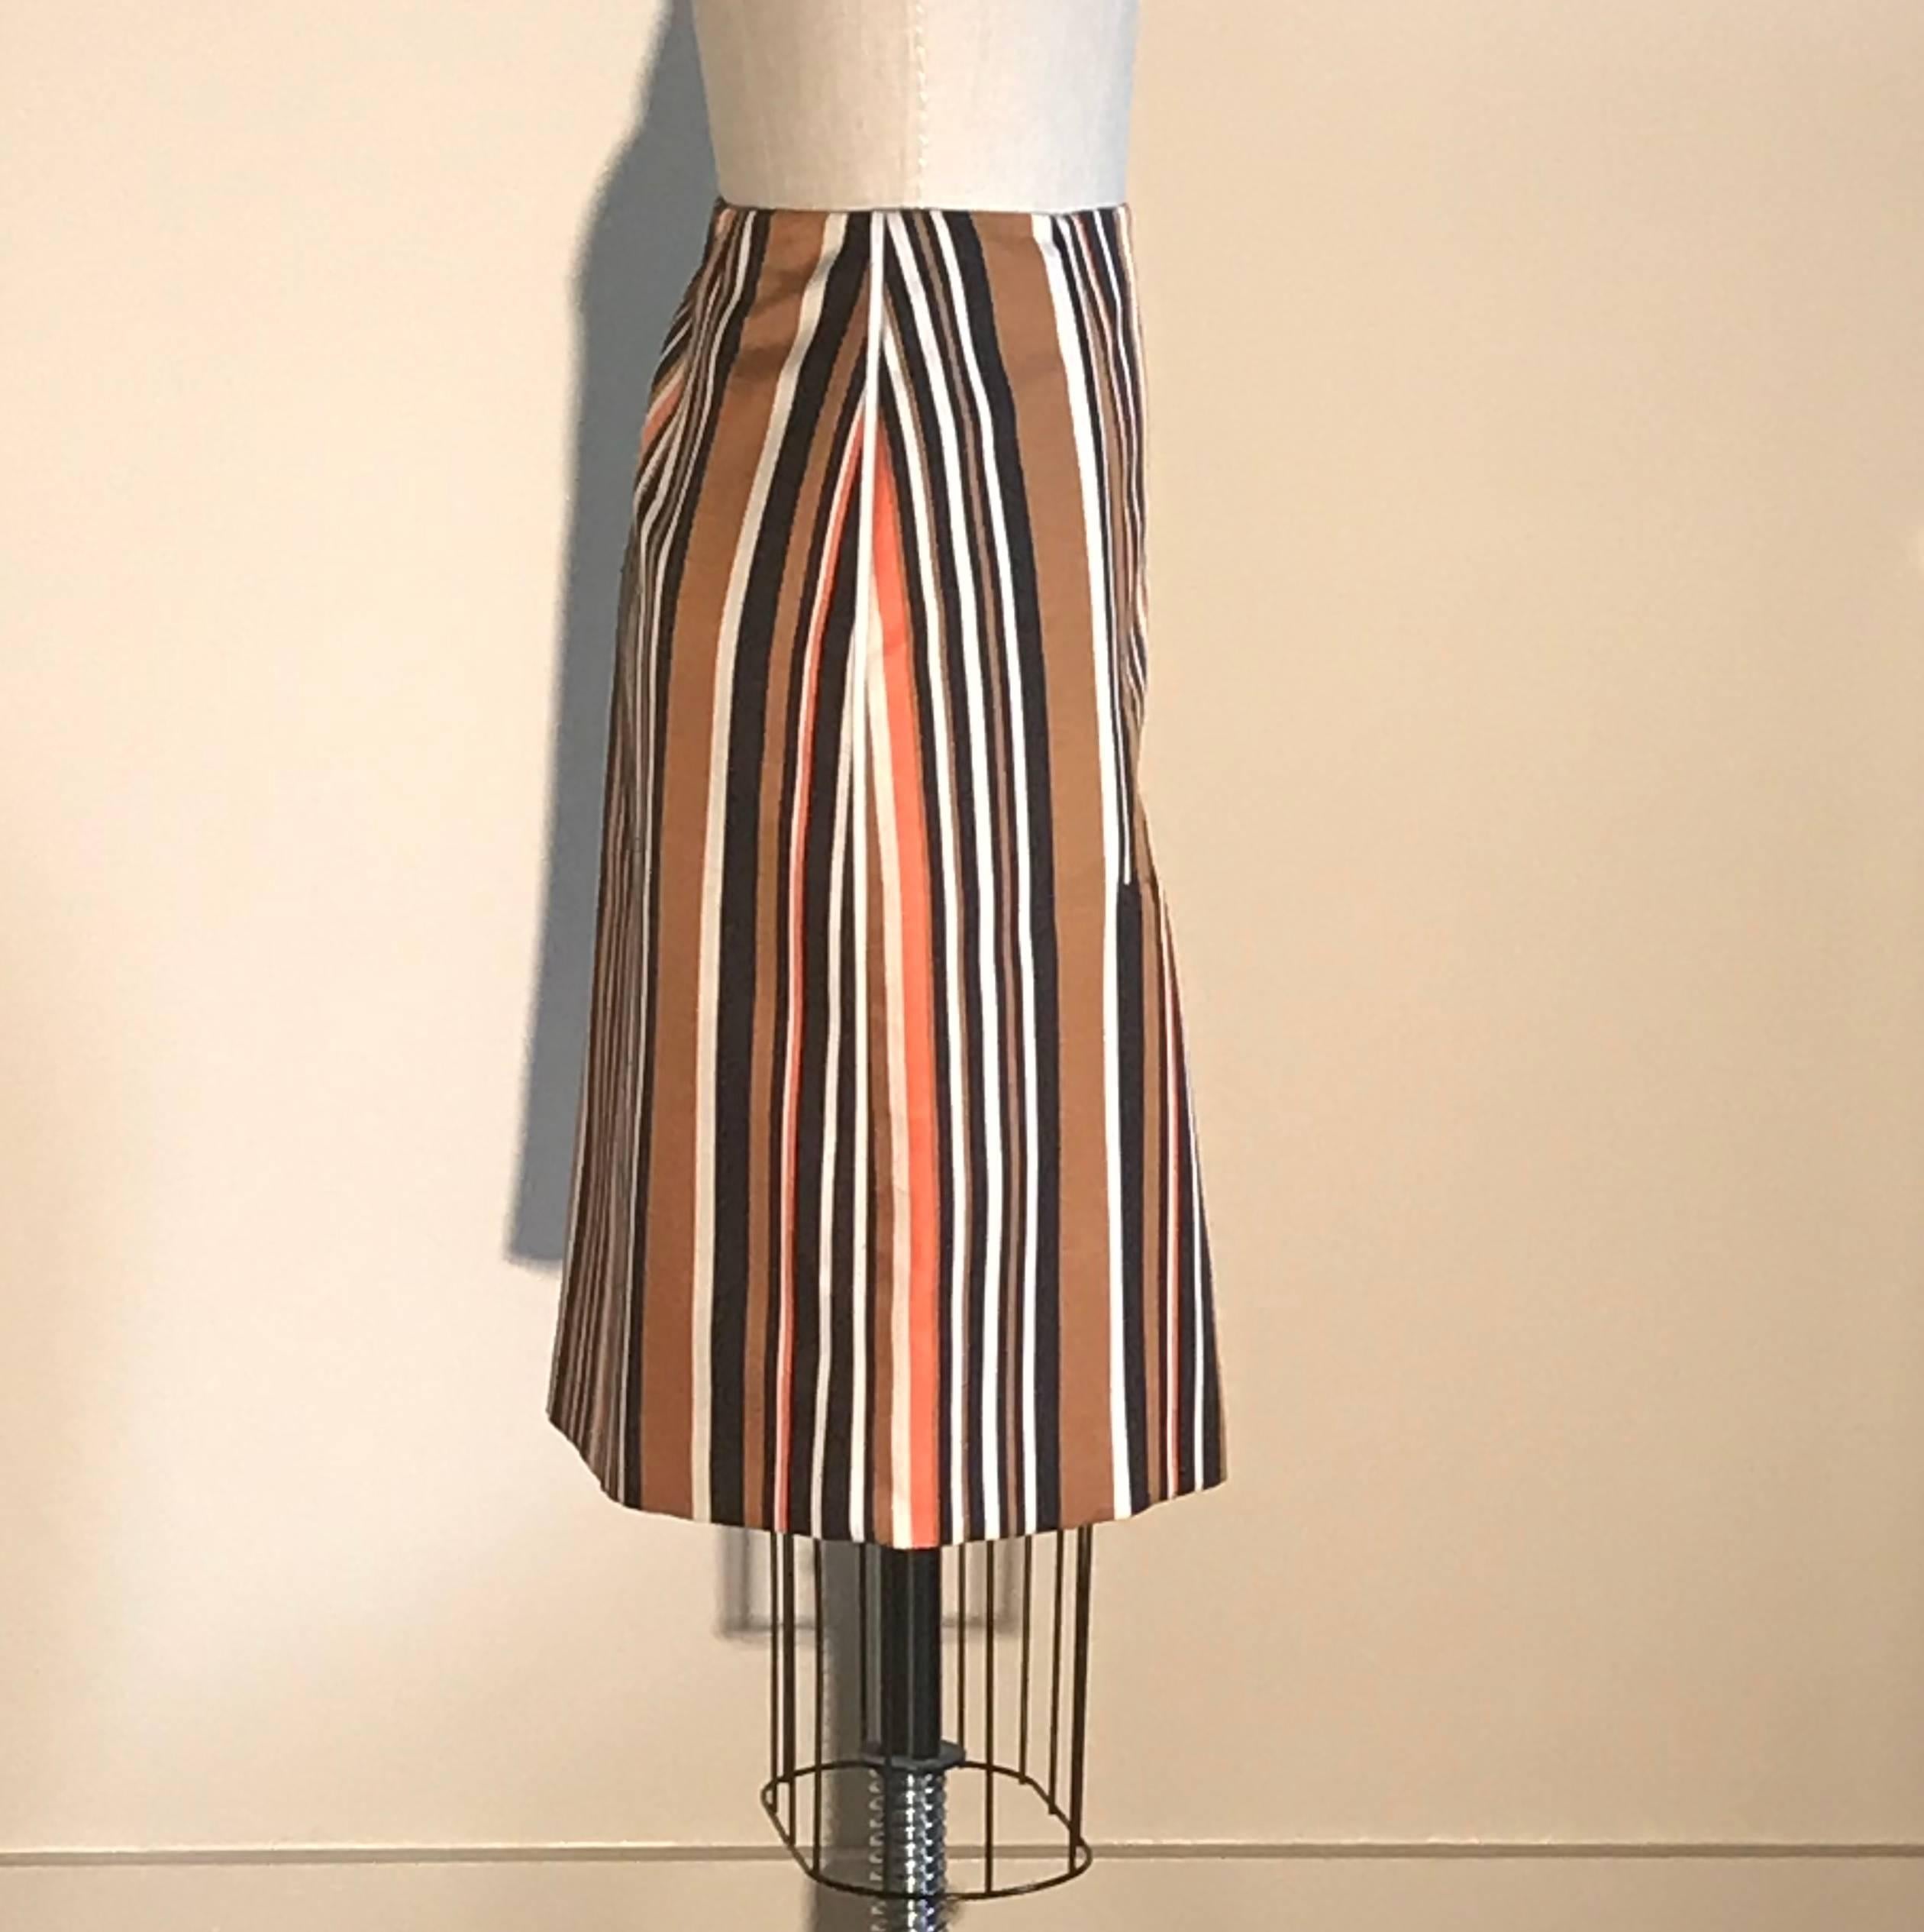 Prada orange, brown, and white striped pencil skirt with white piping detail at front darts and side seams. Side zip.

57% wool, 43% silk.
Fully lined in 66% viscose, 34% silk with polyester interfacing.

Made in Italy.

Size IT 38, approximate US